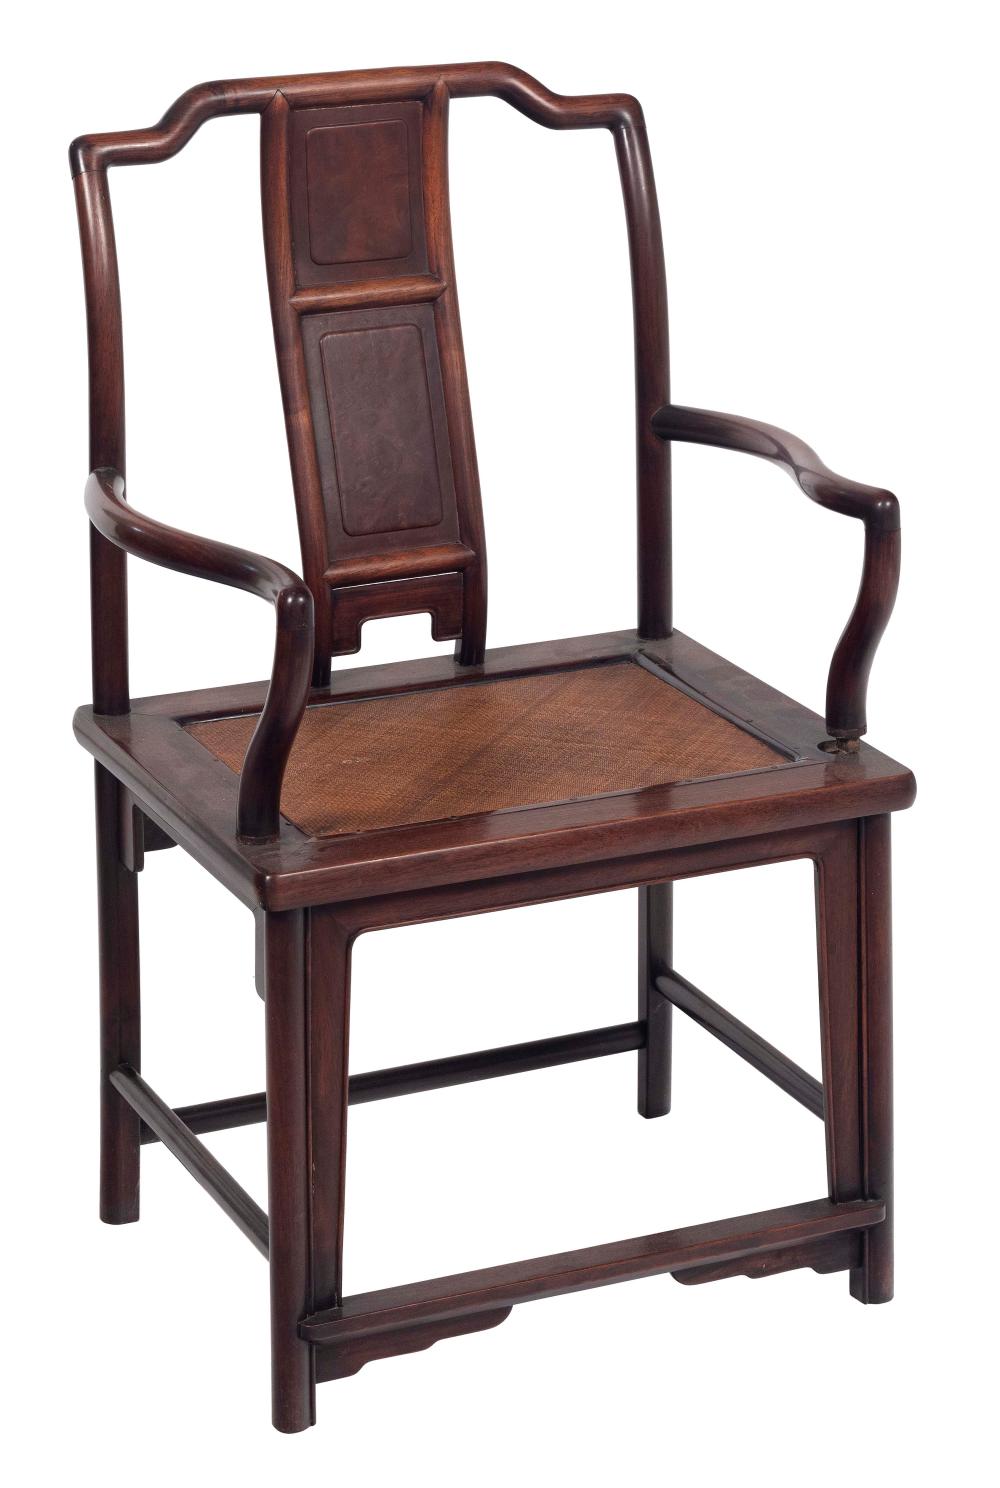 CHINESE HUANGHUALI ARMCHAIR LATE